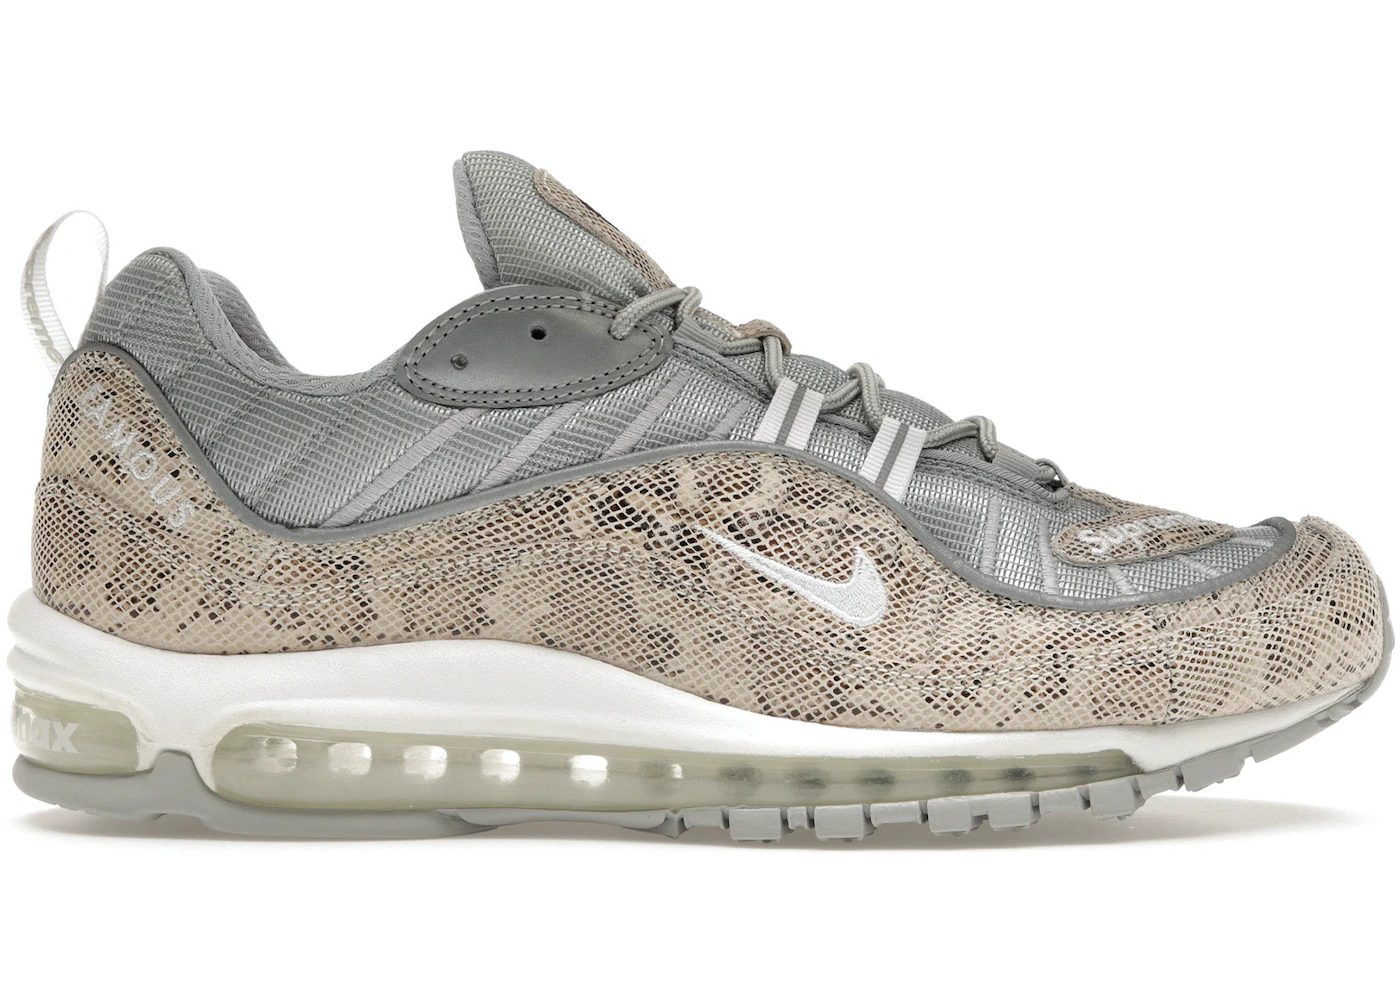 necklace residue Owl Nike Air Max 98 Supreme Snakeskin - 844694-100 - US